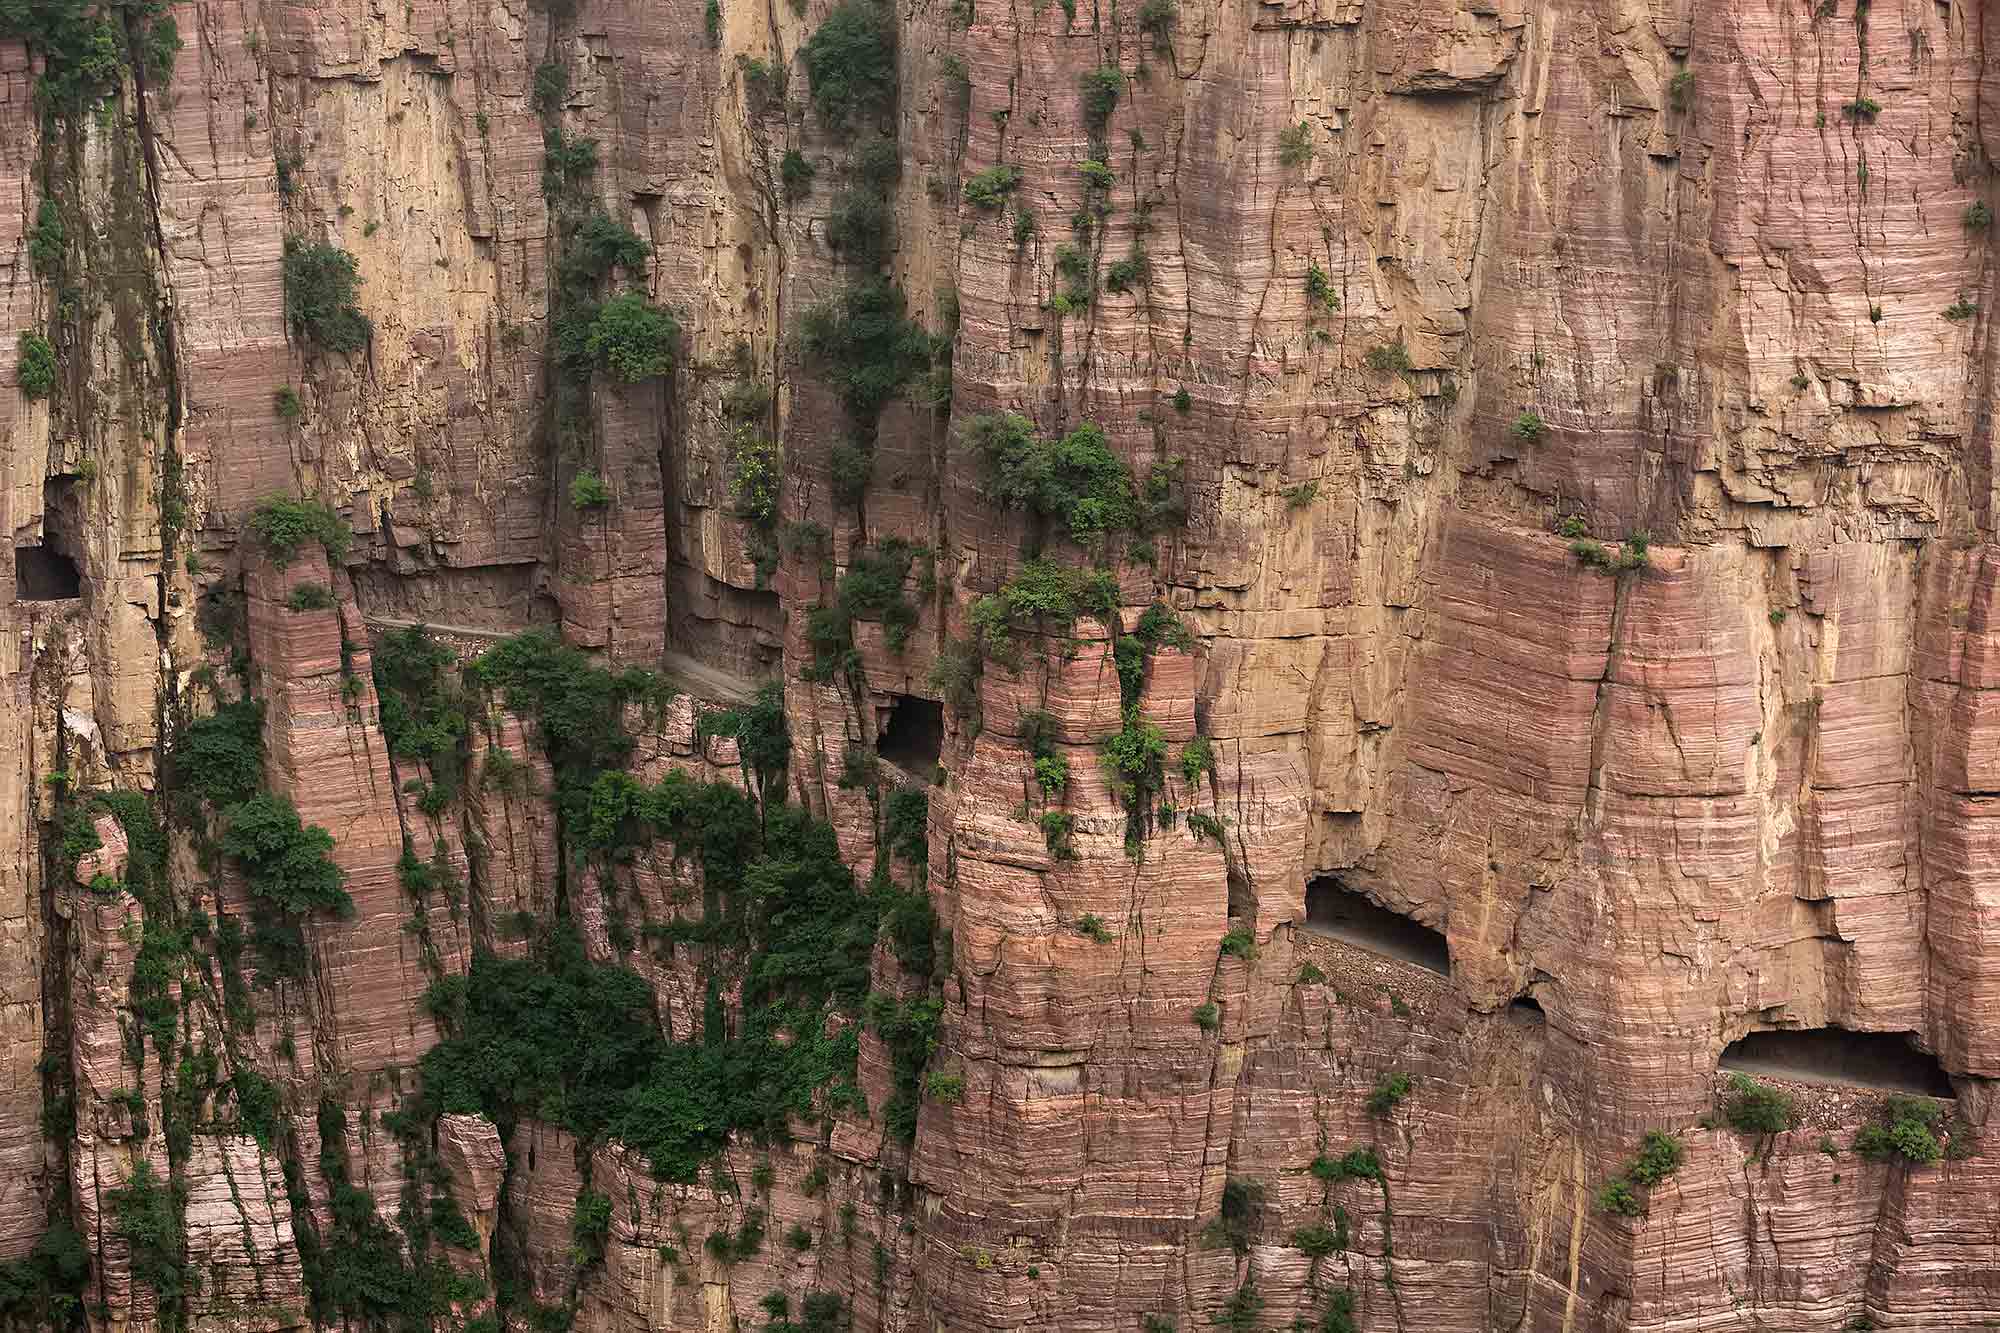 The Guoliang Tunnel Toad in the Taihang Mountains, Henan. © Ulli Maier & Nisa Maier